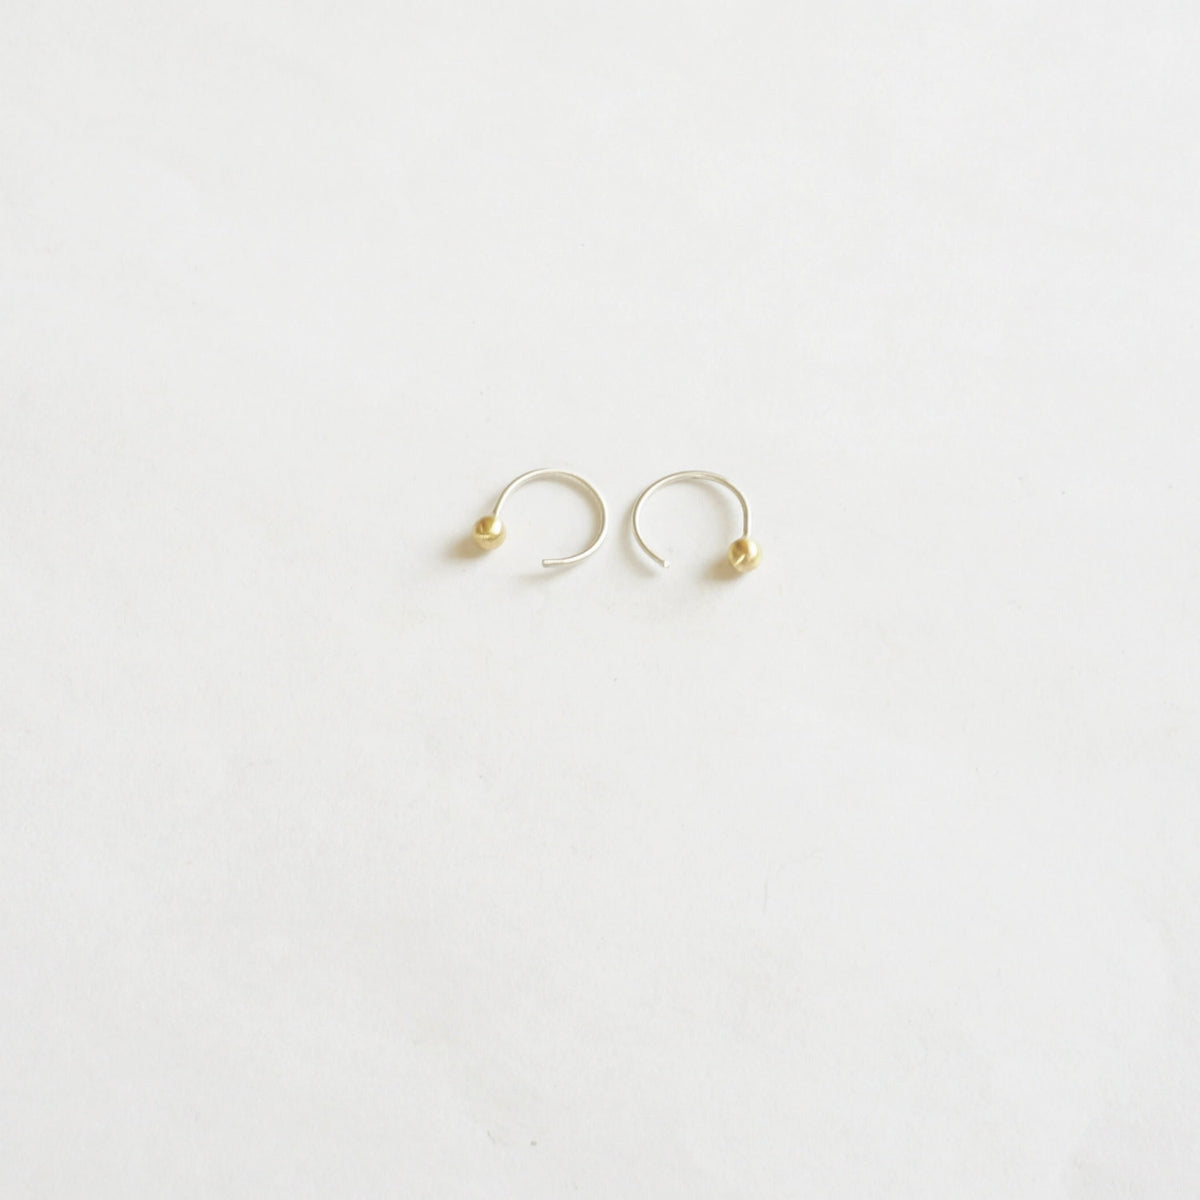 Distinctive Hand-Made Tiny Ear Hugging Sterling Silver Hoops With Ball On End - 0209 - Virginia Wynne Designs